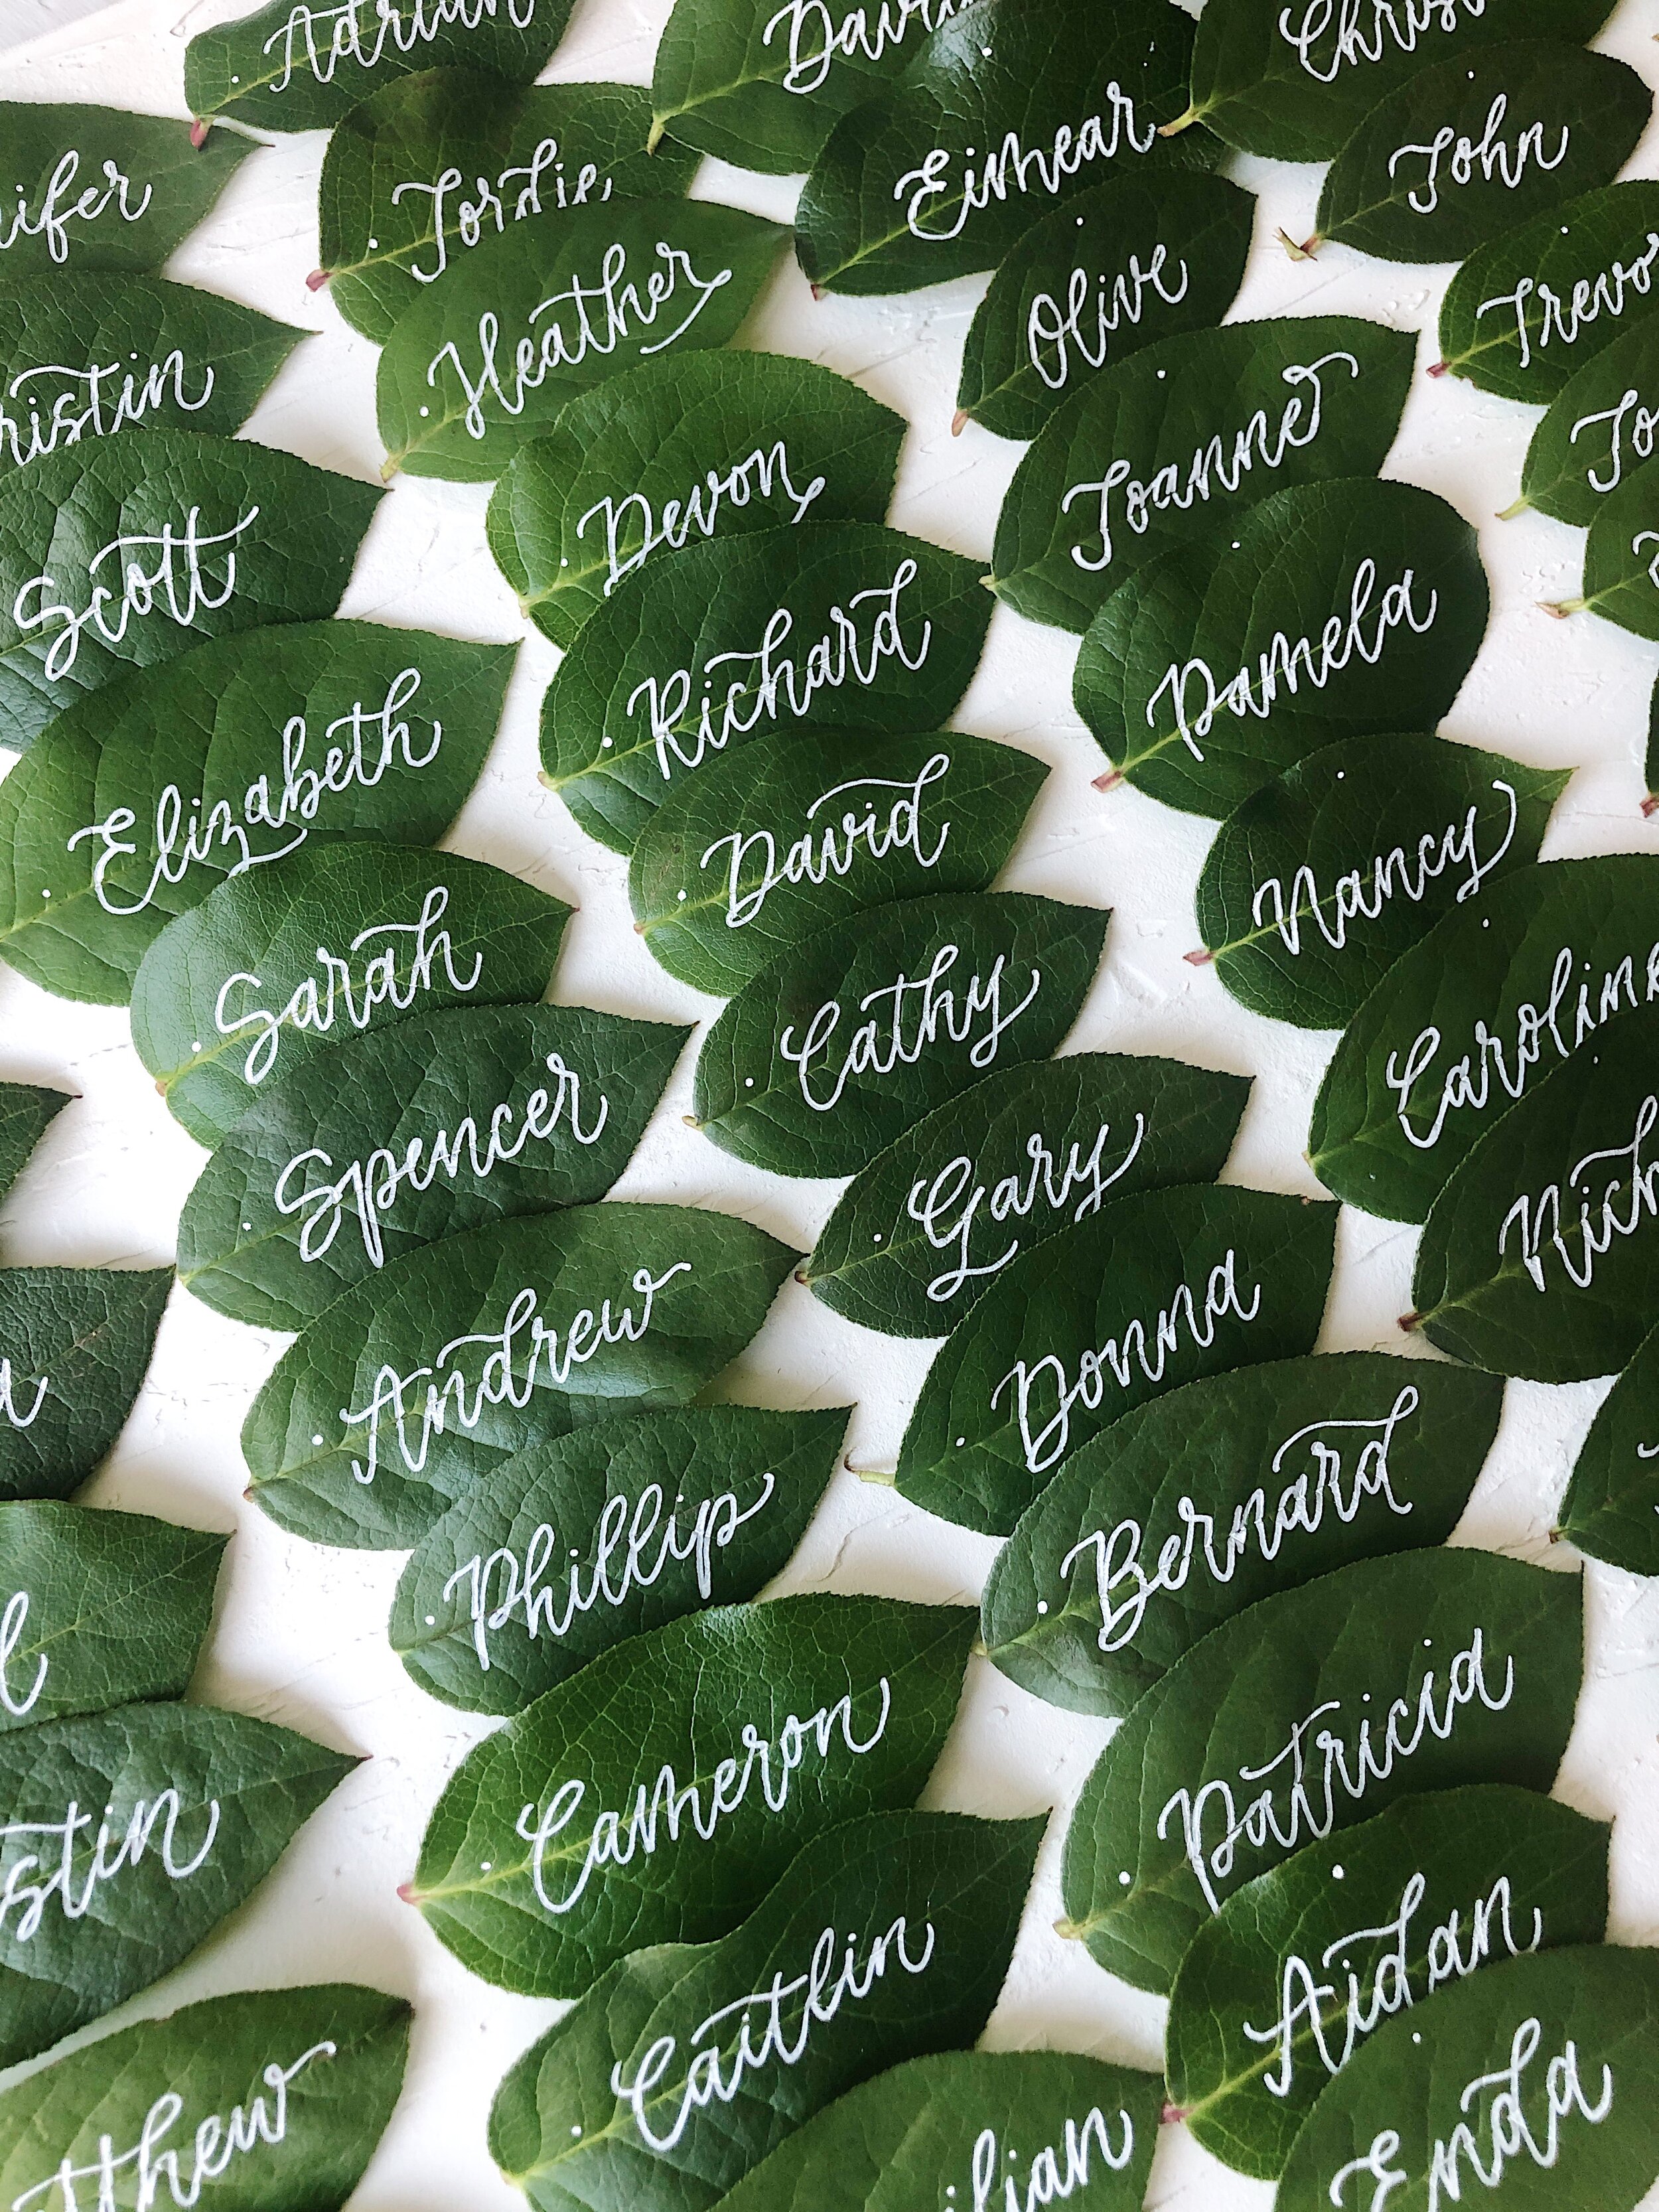 Calligraphy names on leaves as place cards for a Toronto wedding